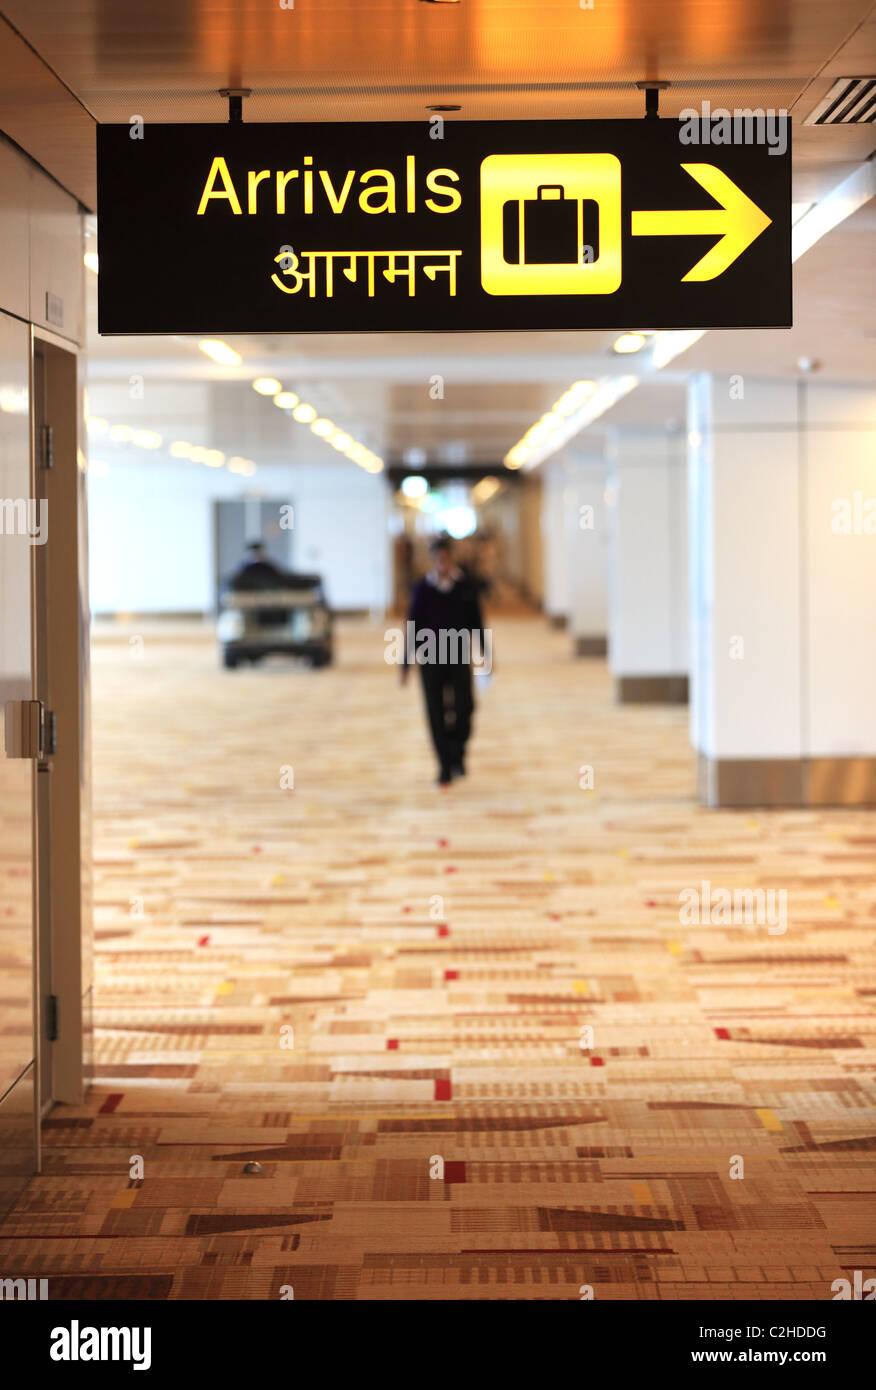 Arrivals sign at the Delhi airport North India Asia Stock Photo